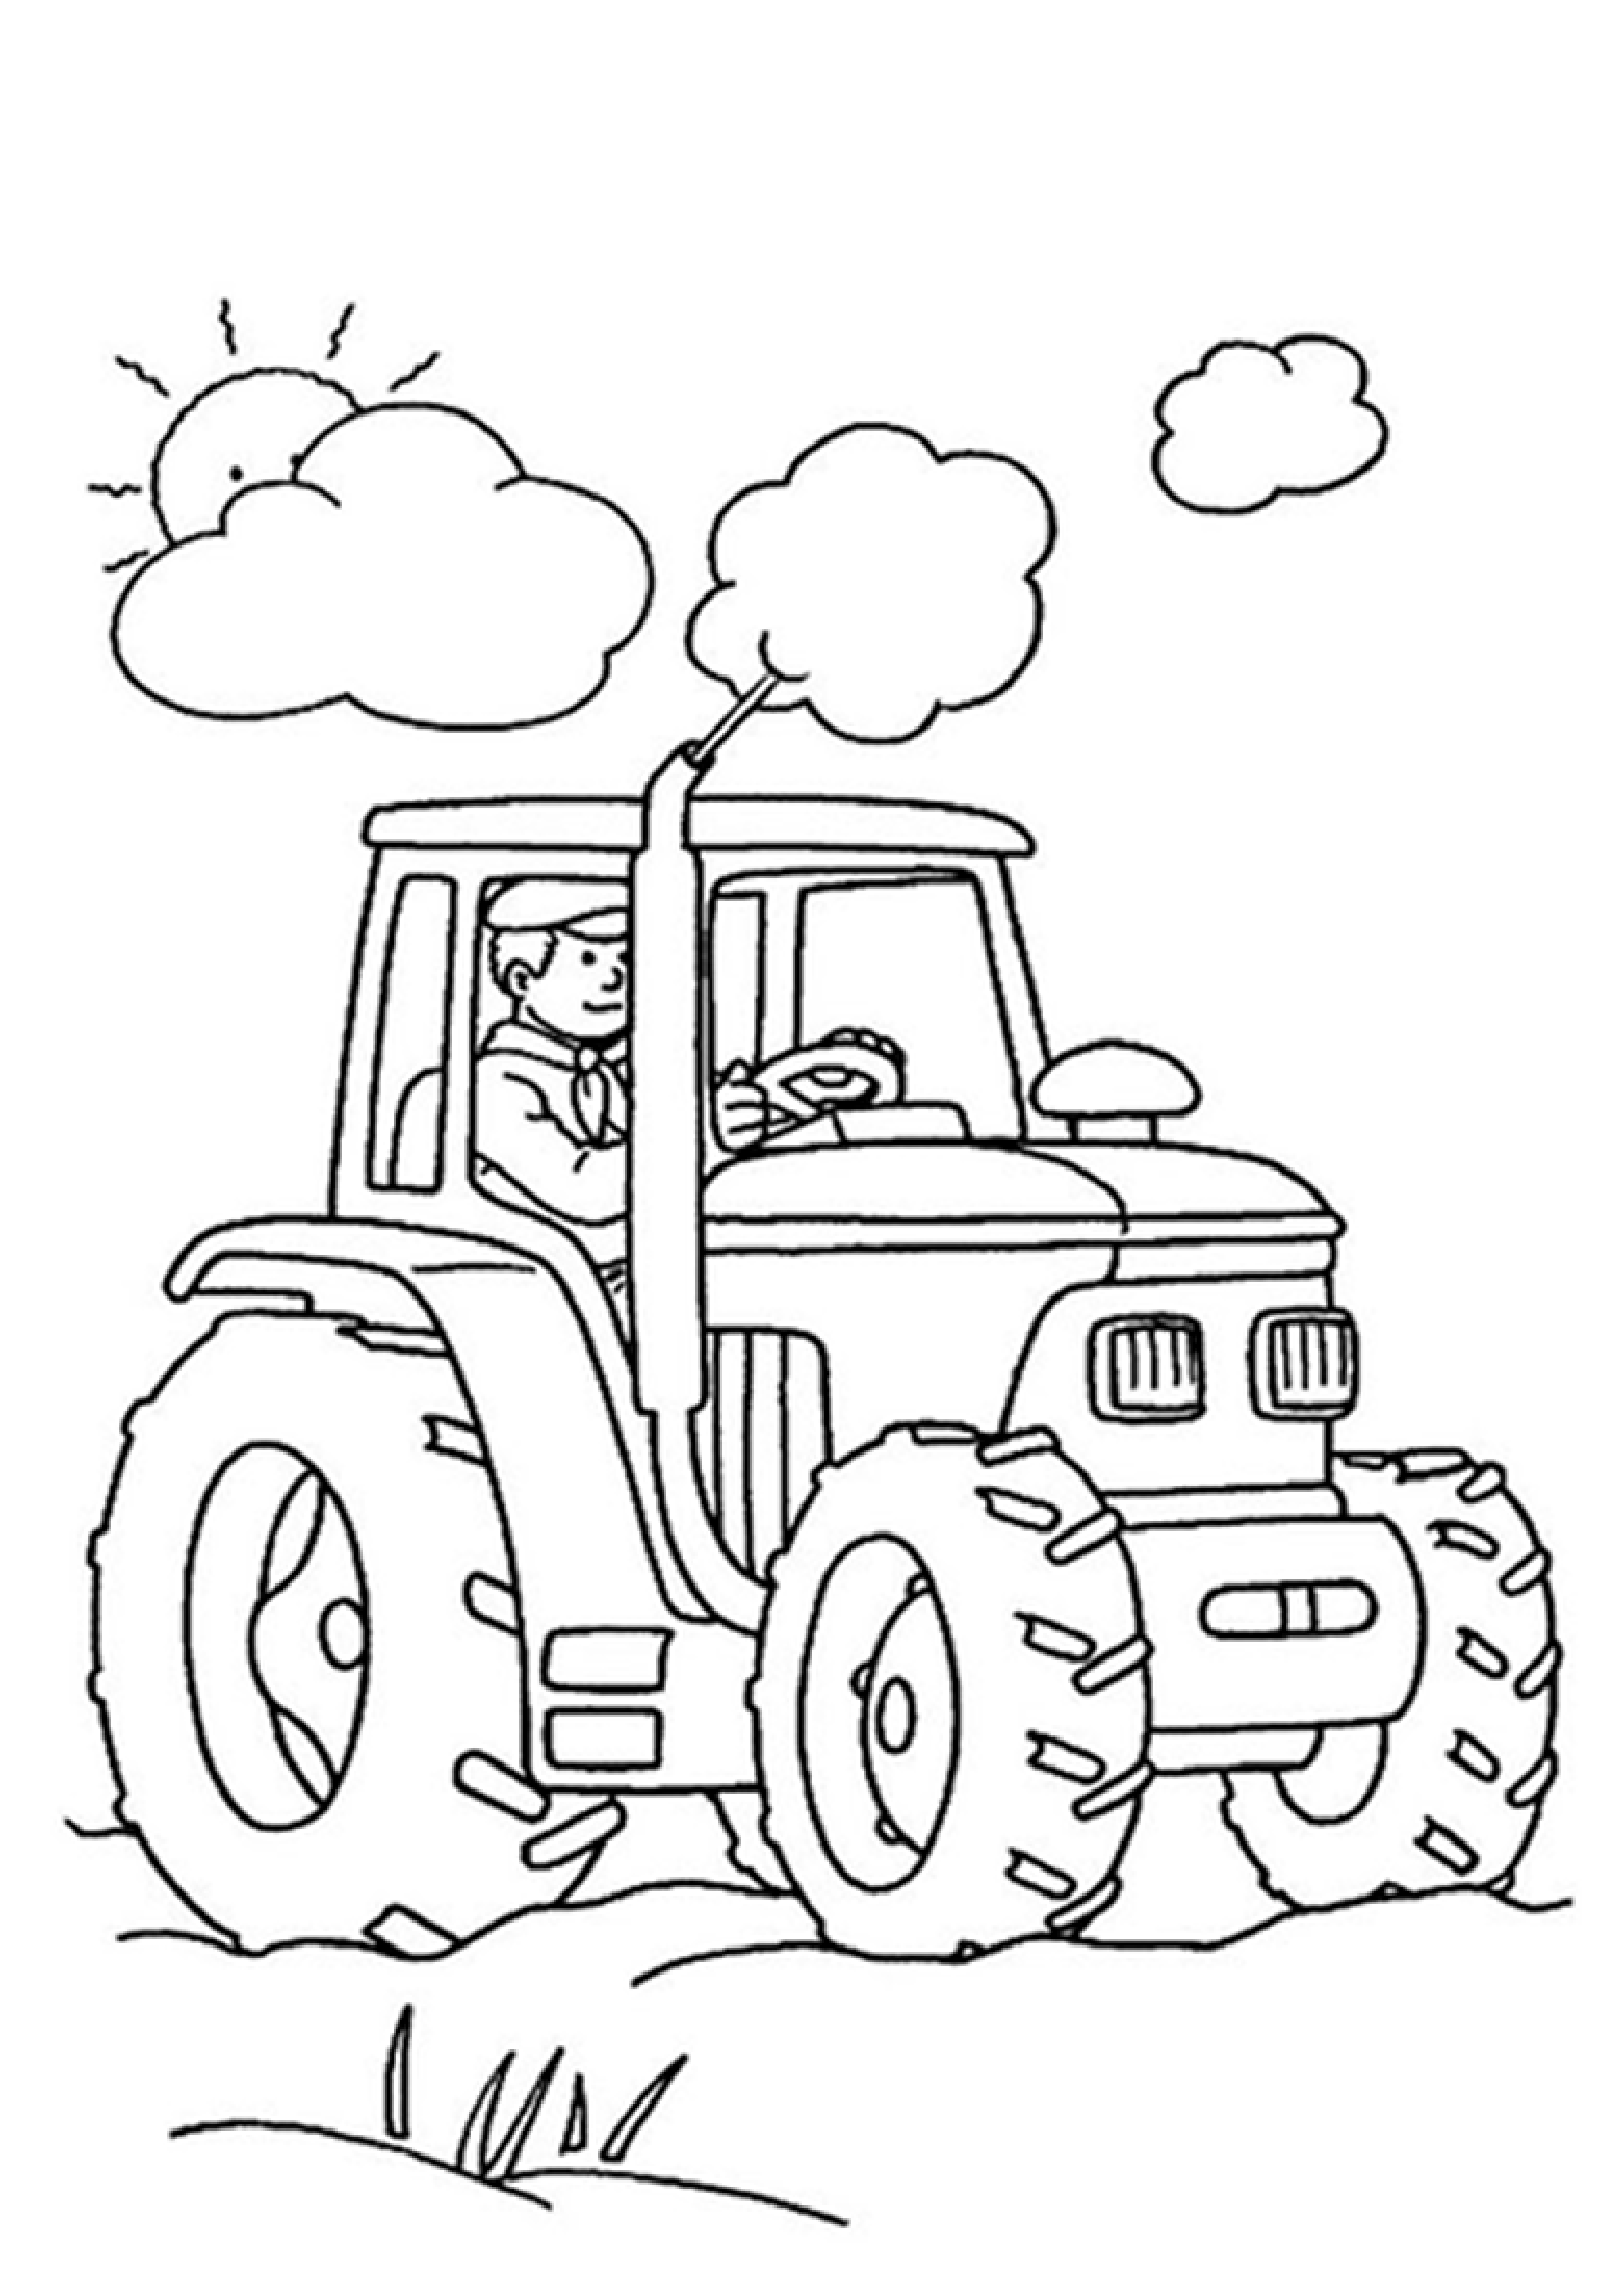 printable tractor coloring pages free printable tractor coloring pages for kids cool2bkids tractor coloring printable pages 